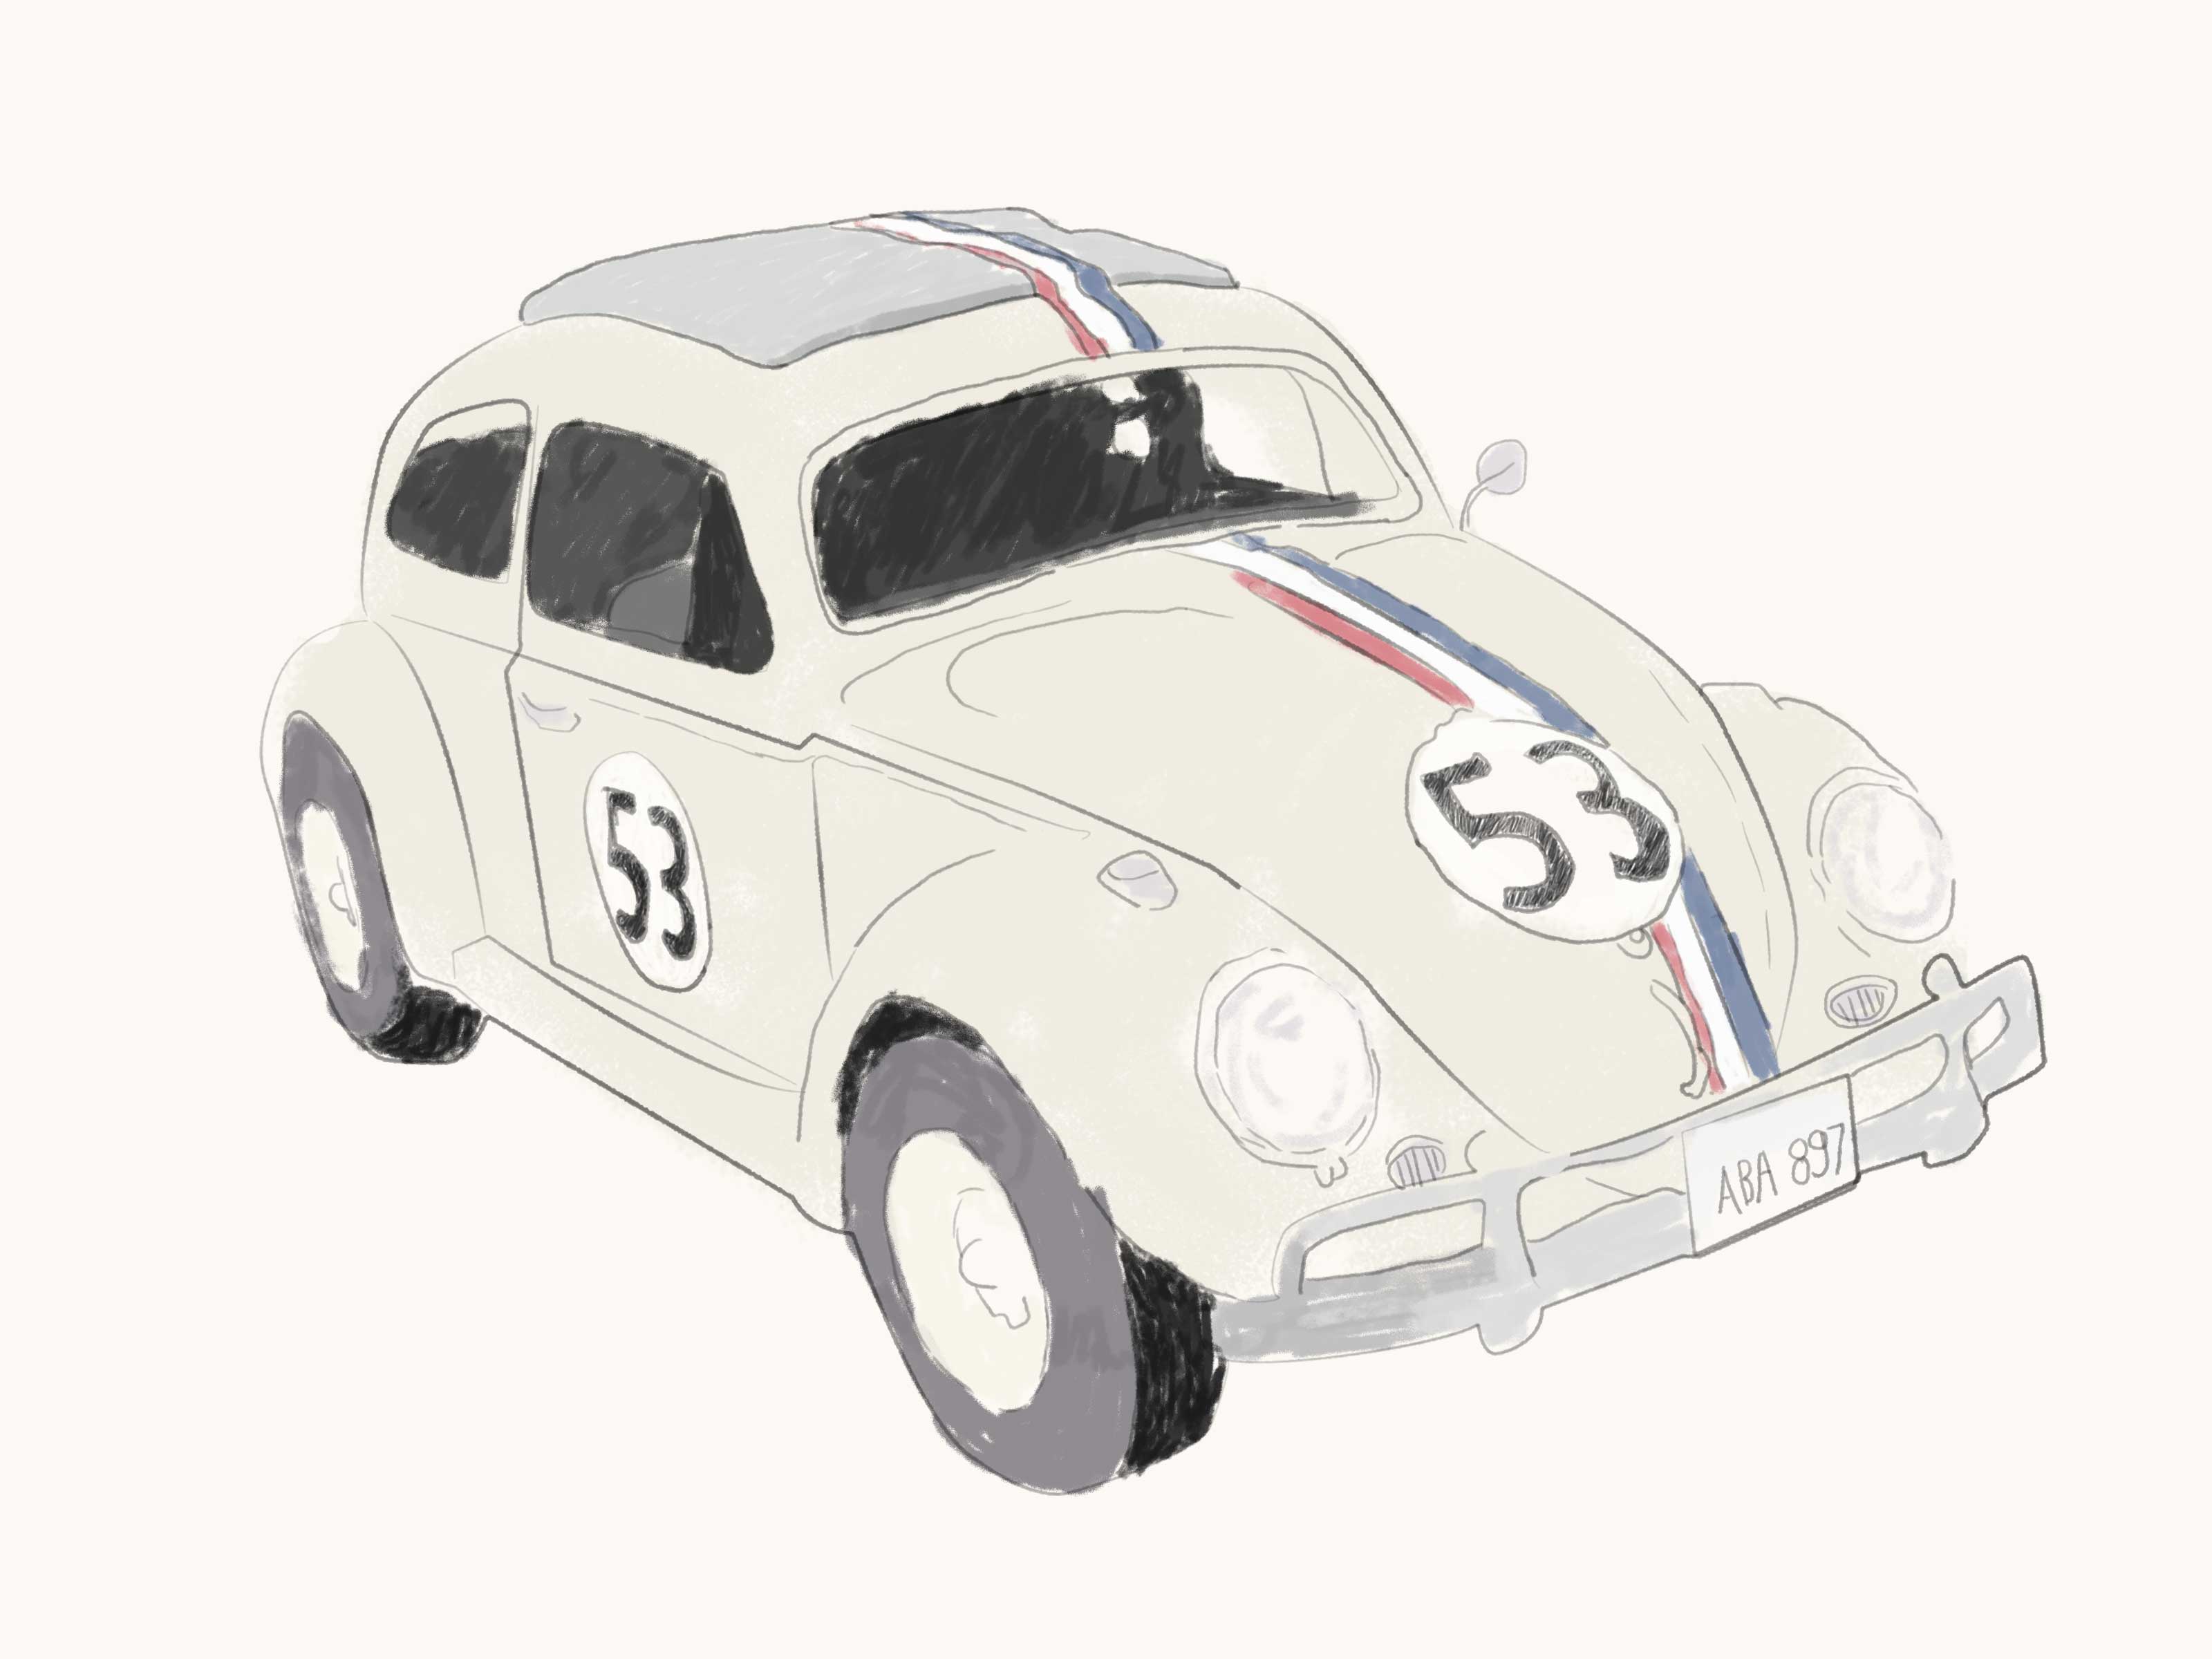 Herbie the Love Bug: 5 Steps (with Picture)